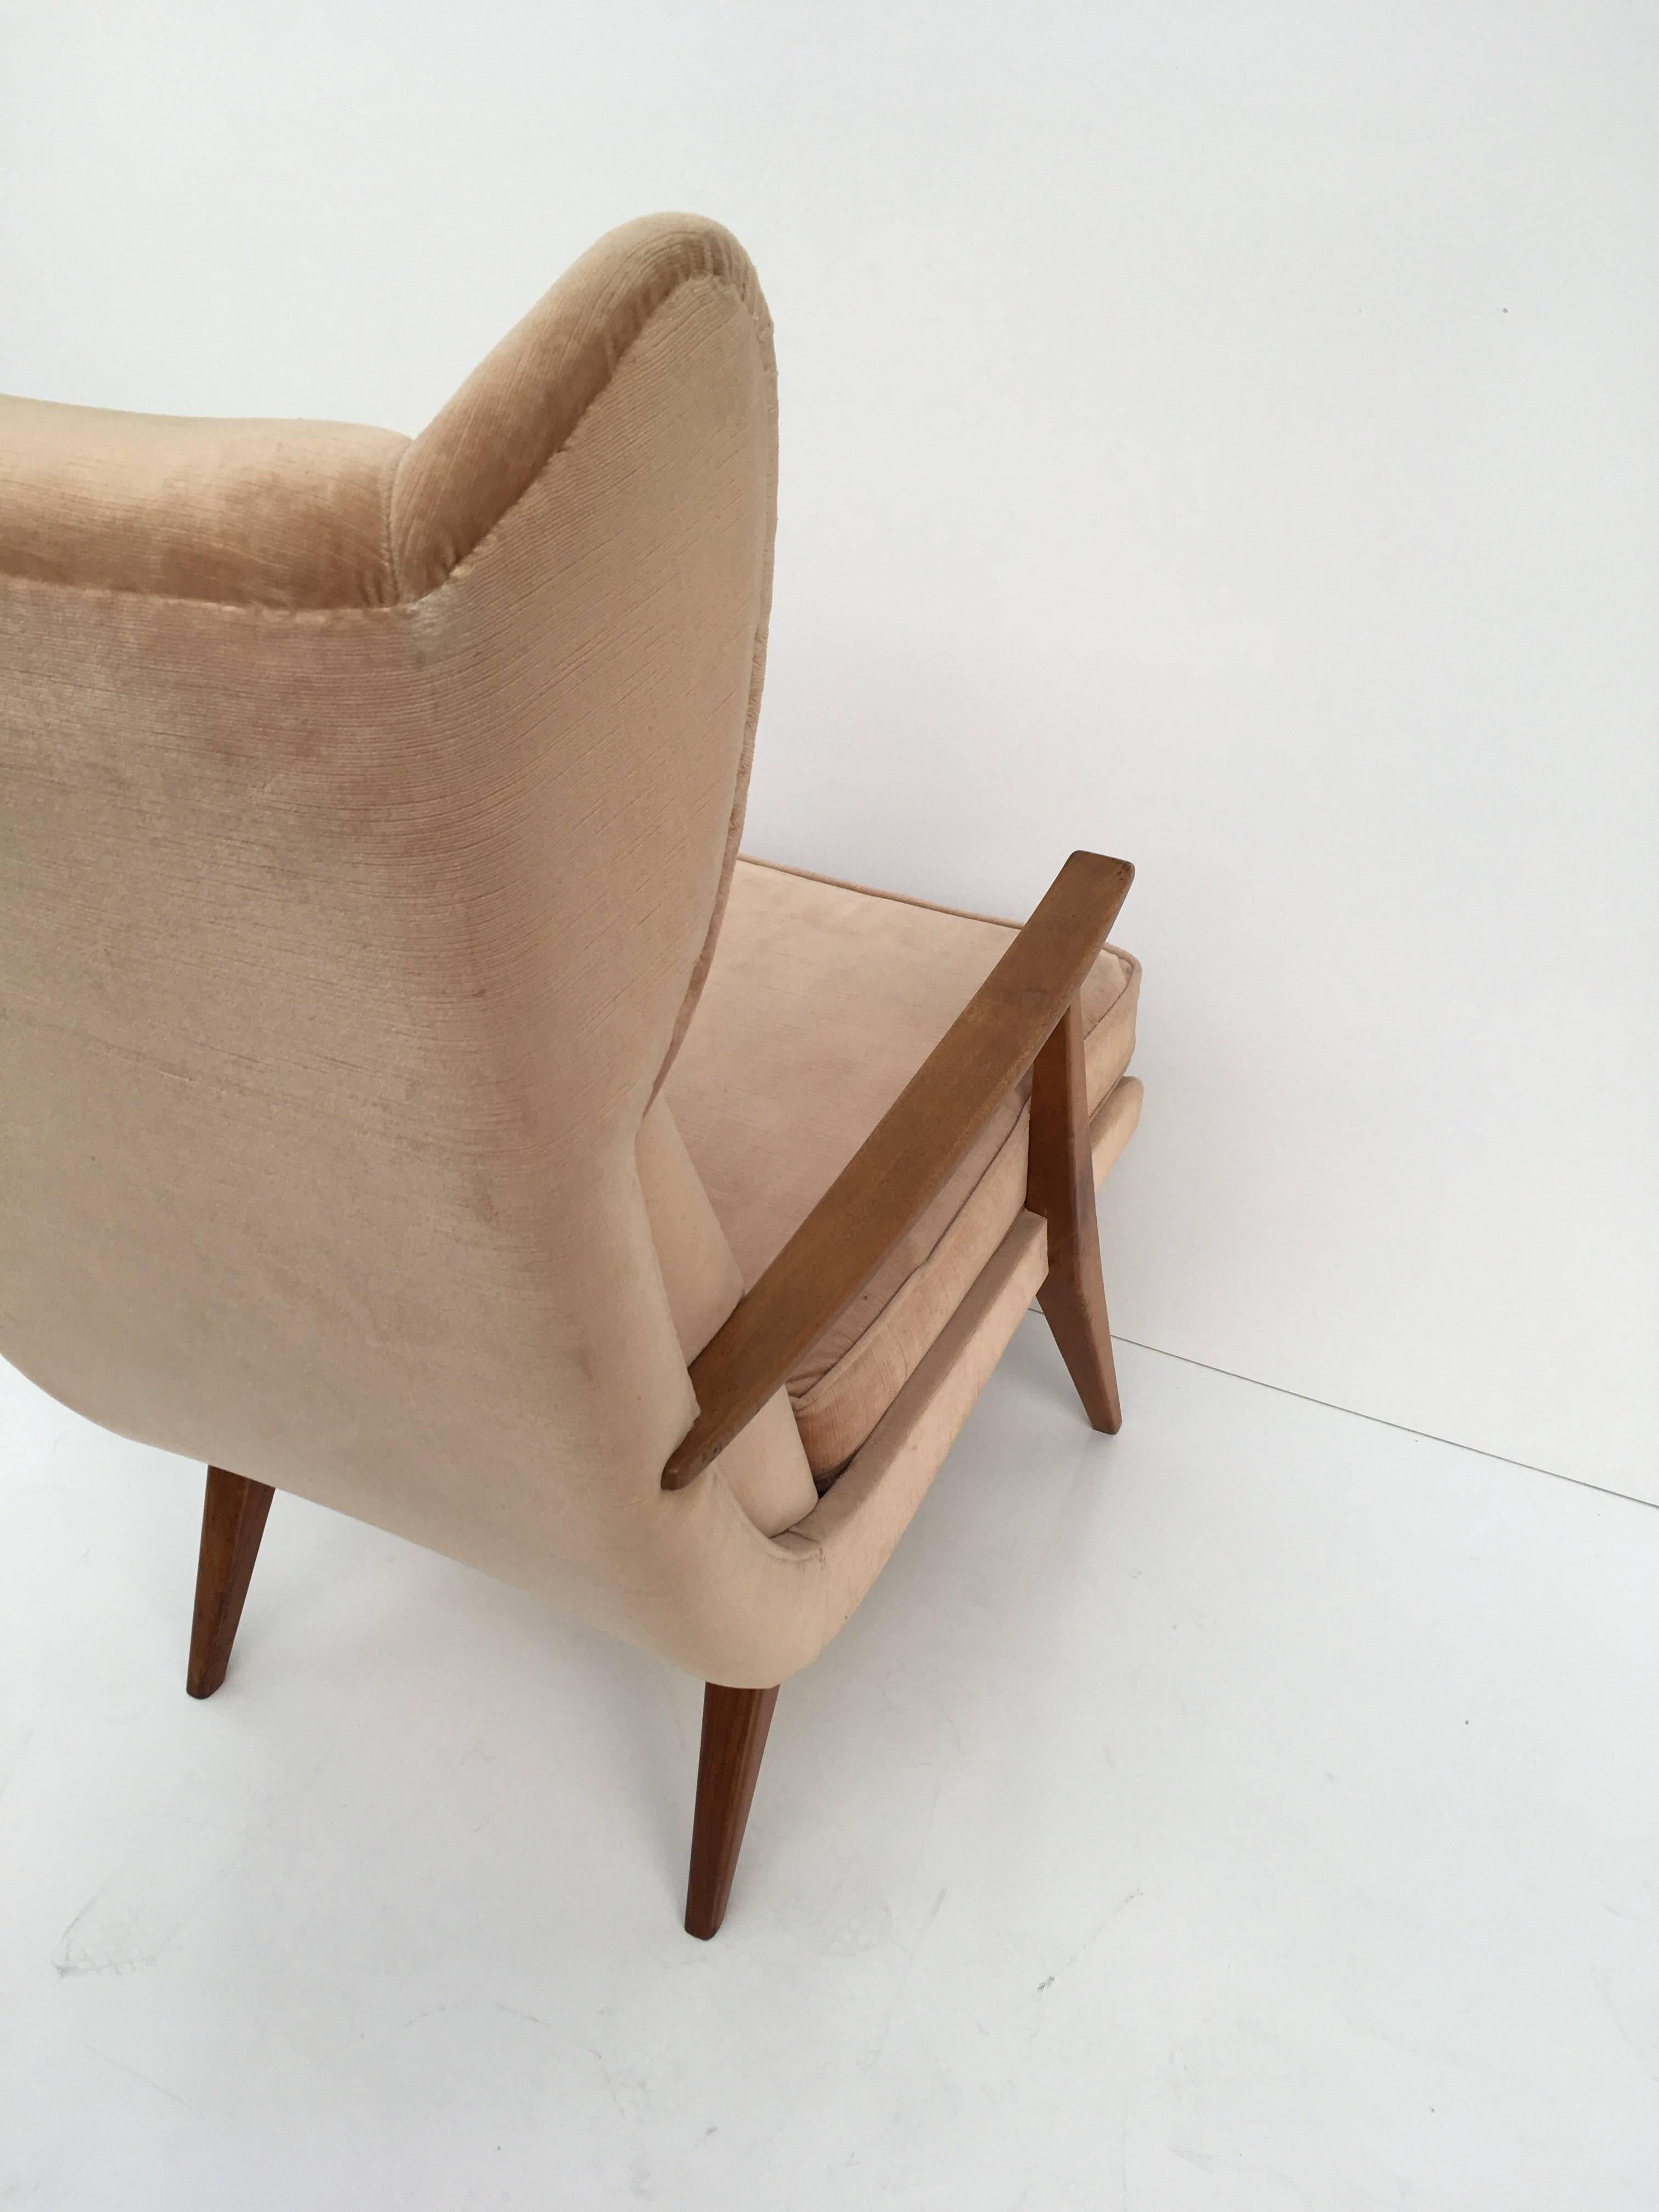 On offer is a very rare example by local Australian maker Danish Deluxe, 1950s. This is an exceptionally comfortable and equally stylish example of local manufacturing from the 1950s. Undeniable quality, presents in very good original order.